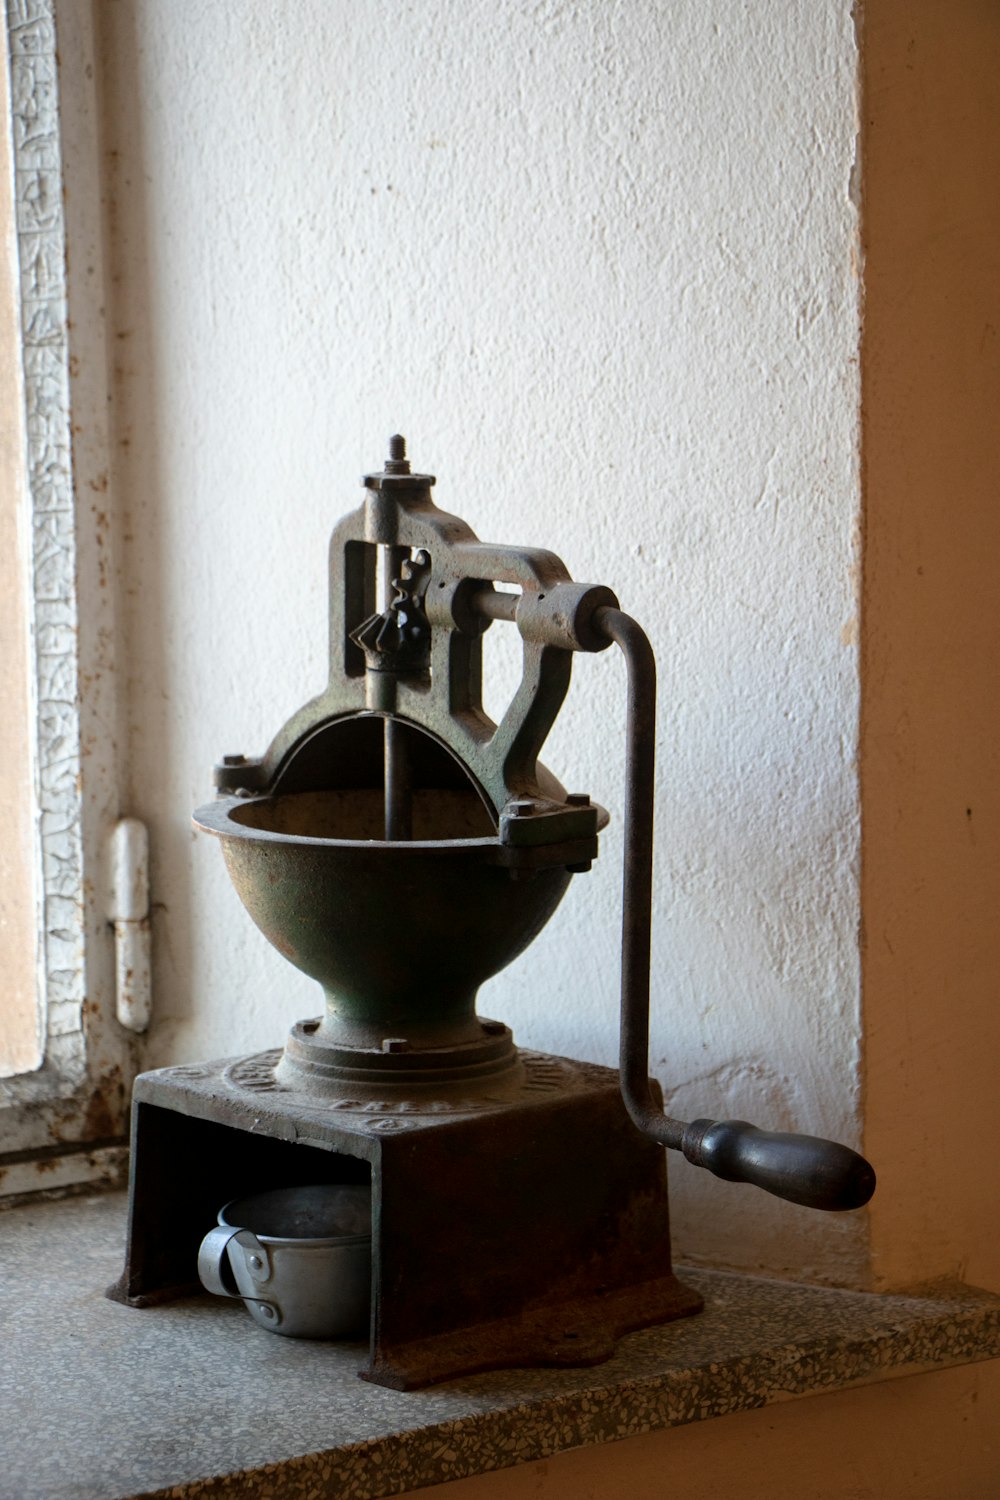 a coffee pot sitting on top of a stove